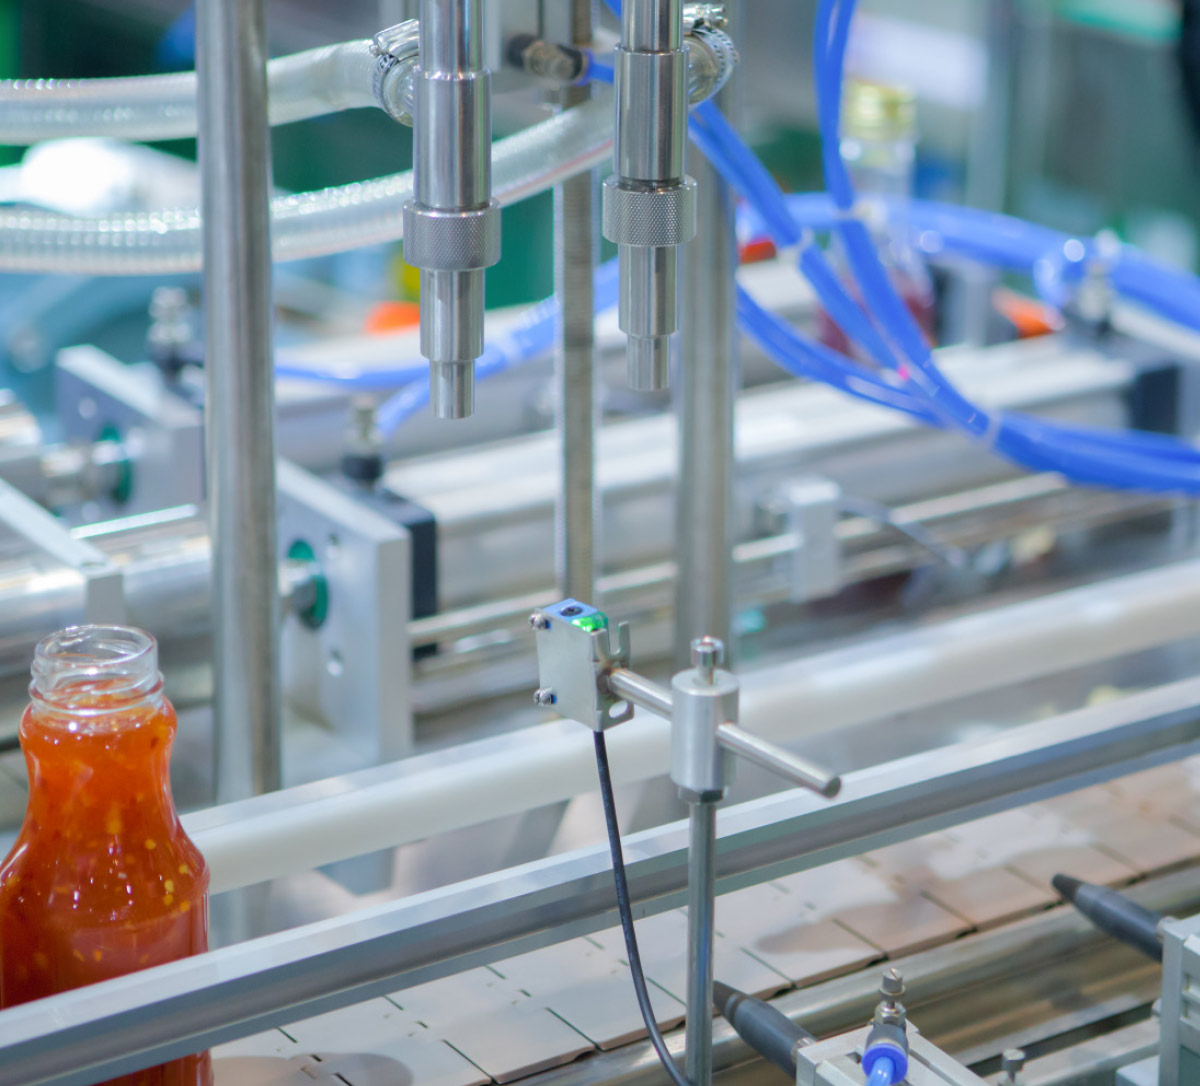 Performance plastics are used in many ways for food and beverage processing